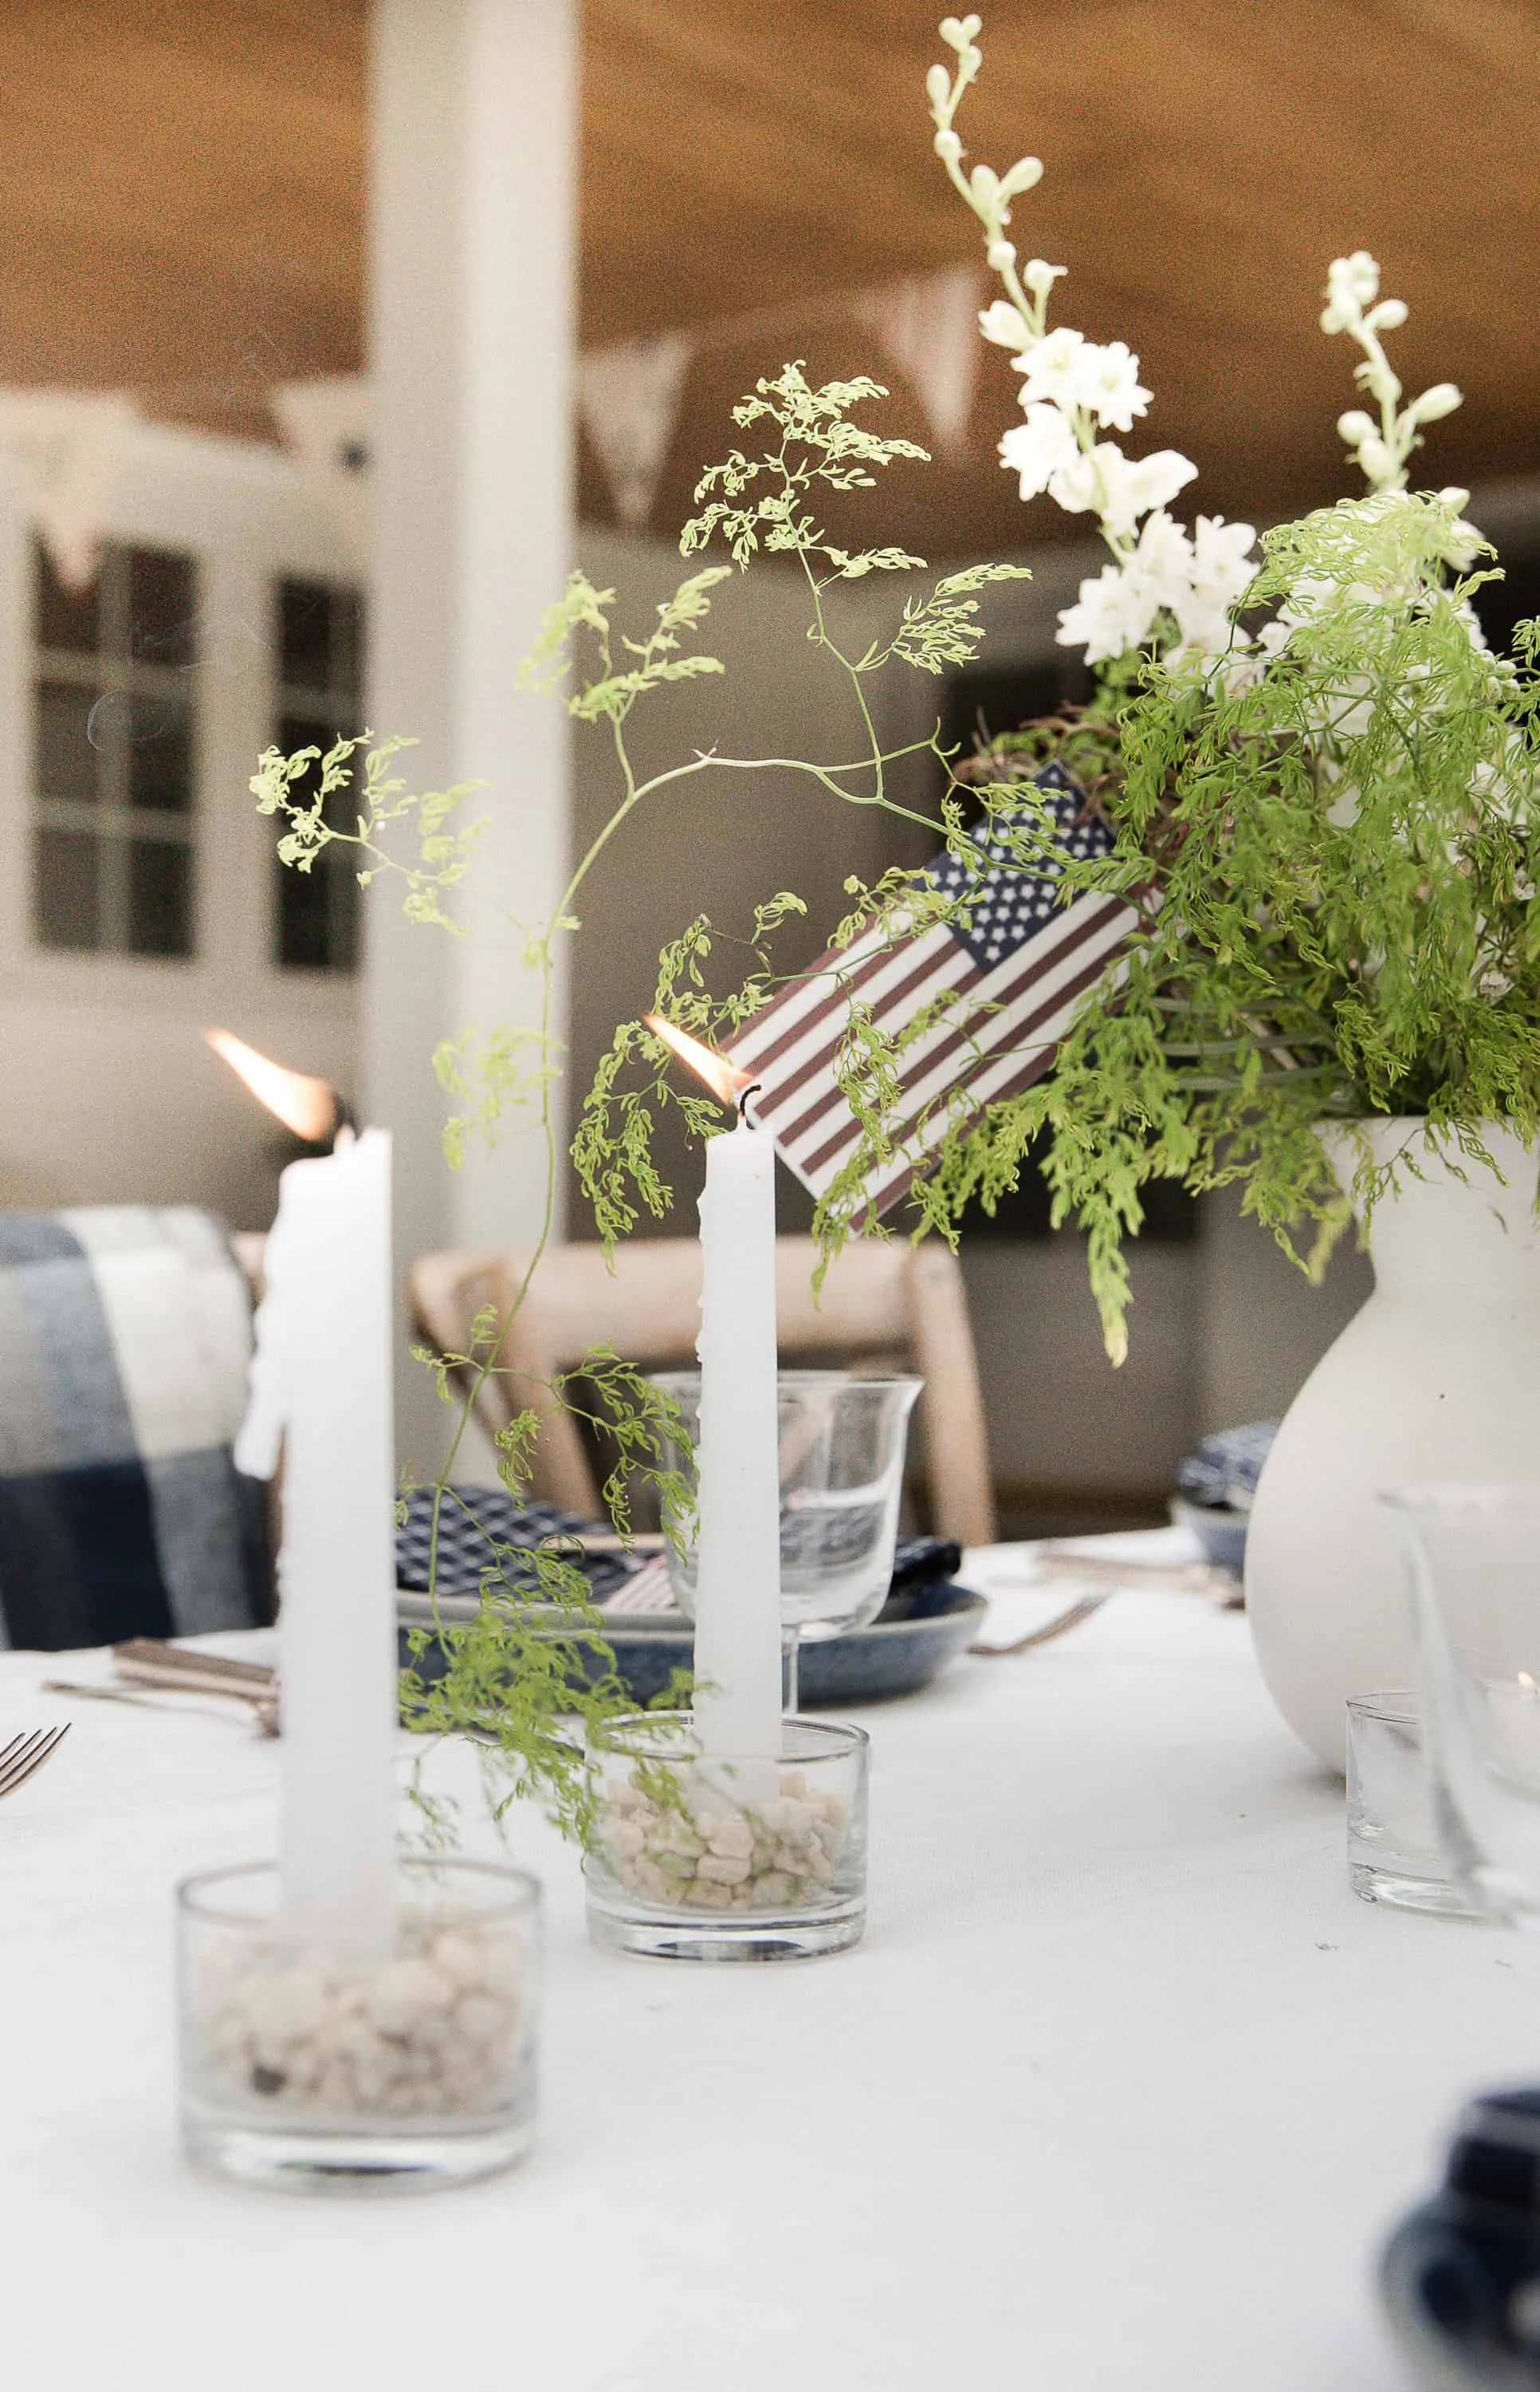 Get inspired for Fourth of July with this easy table decor and centerpiece idea! 